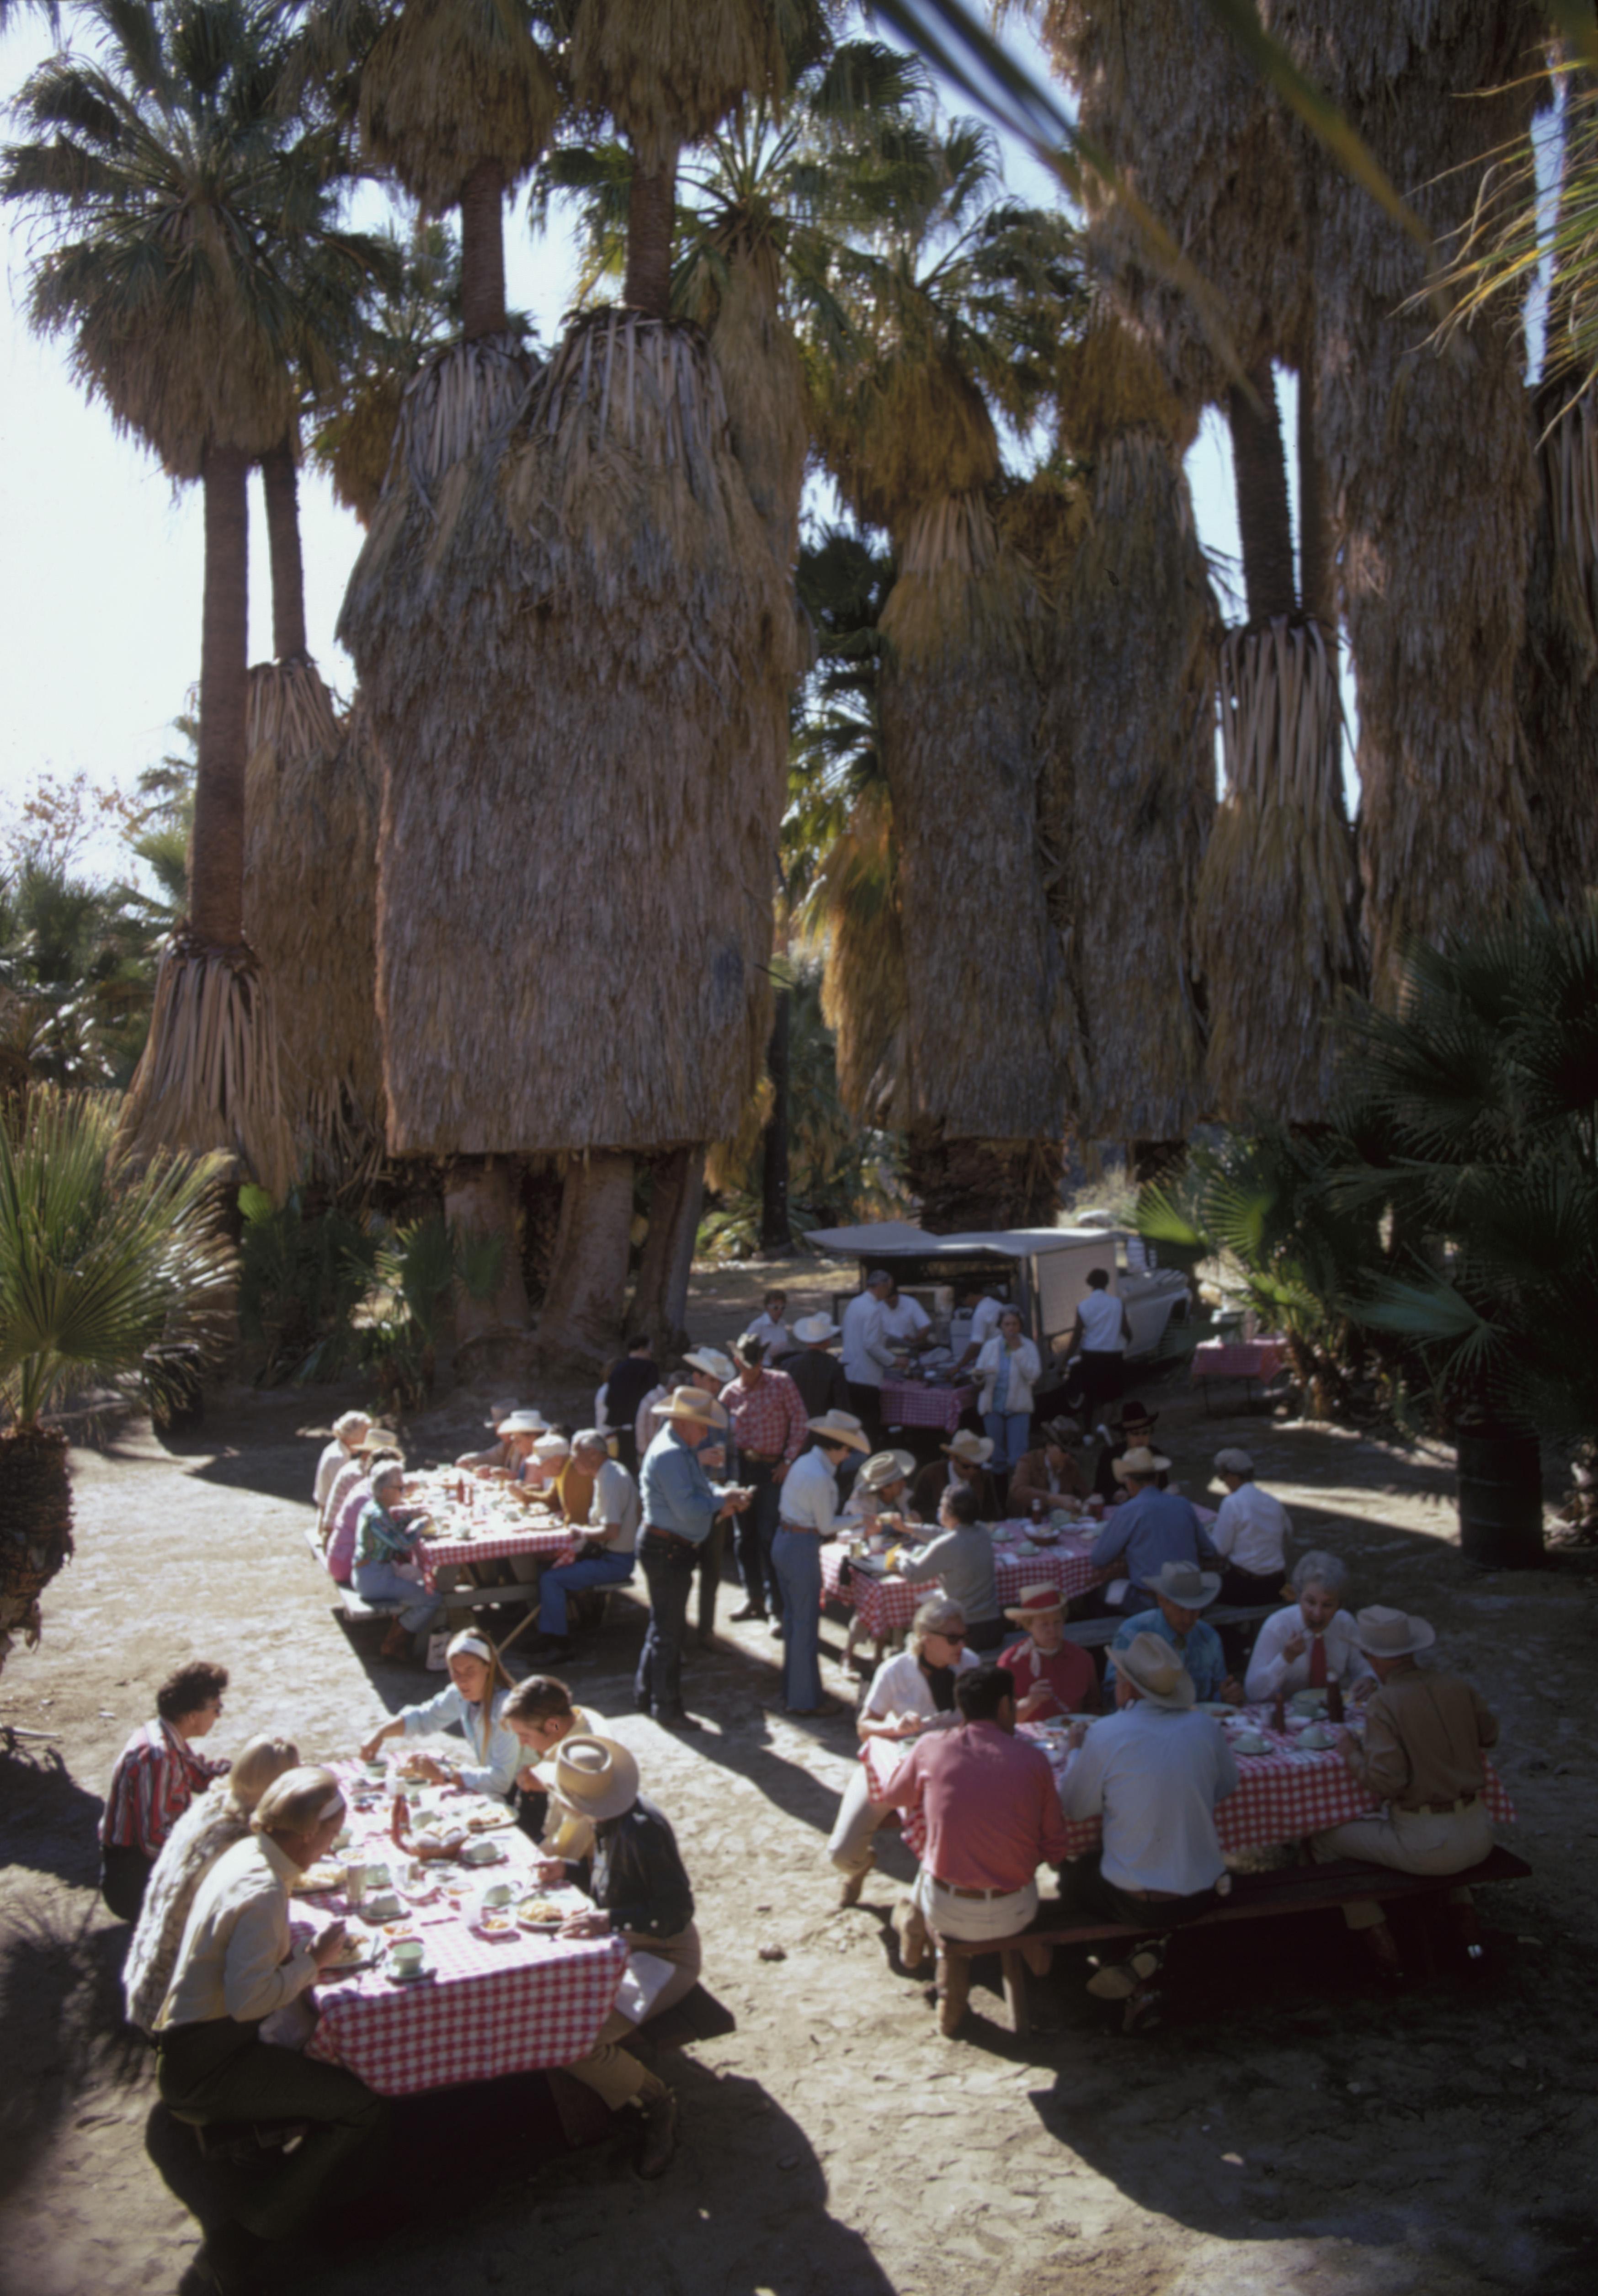 'Lunch Al Fresco' 1970 Slim Aarons Limited Estate Edition Print 

A group of horse riders stop for lunch among Washingtonia palms in Andreas Canyon, Palm Springs, southern California, January 1970.

Produced from the original